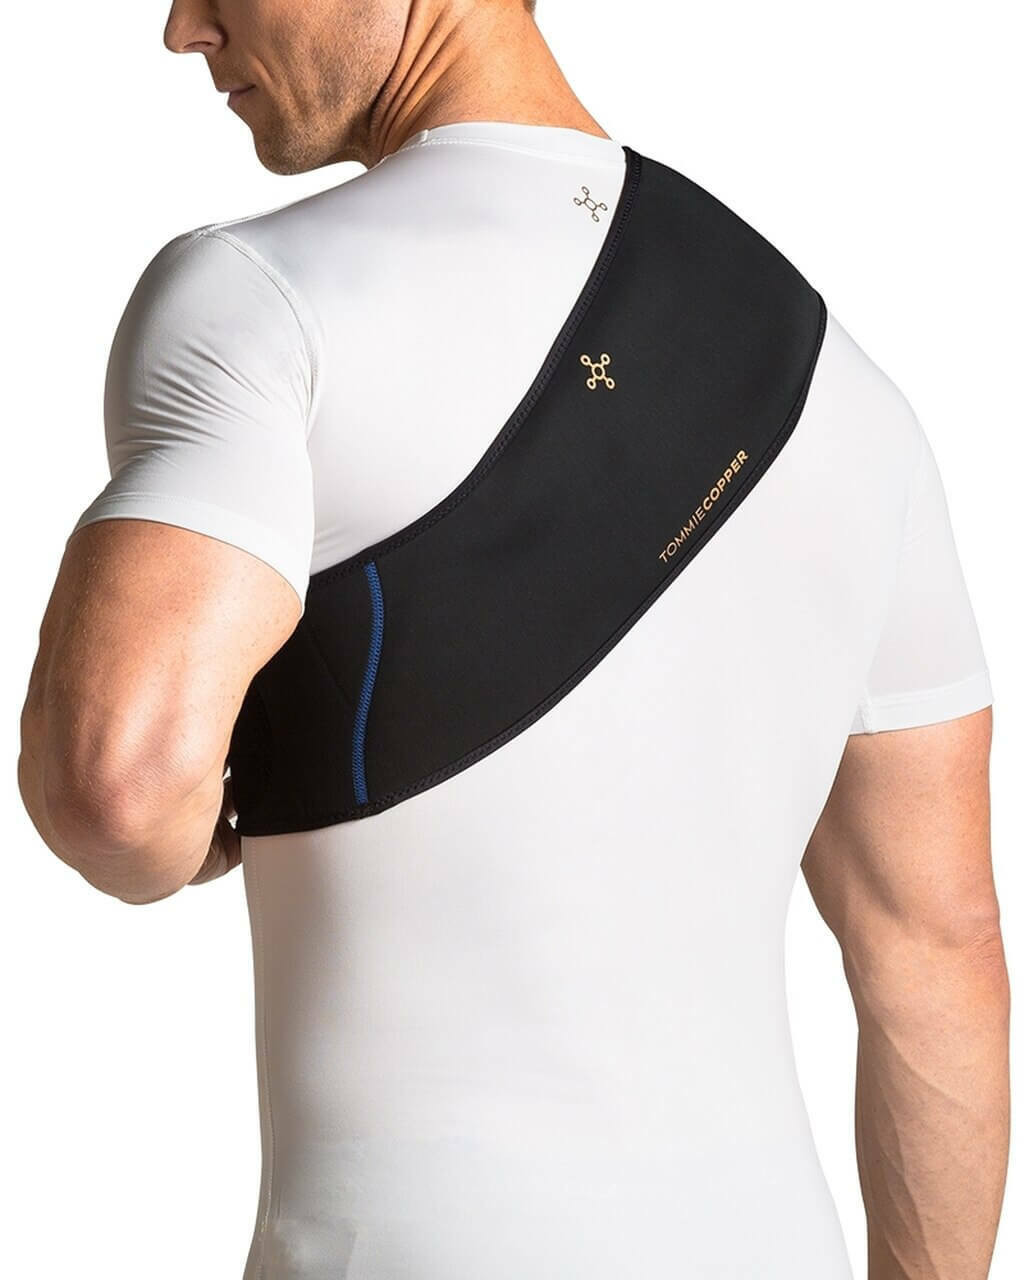 Tommie Copper Sport Hot and Cold Compression Back Wrap, Black, One Size,  Brace 